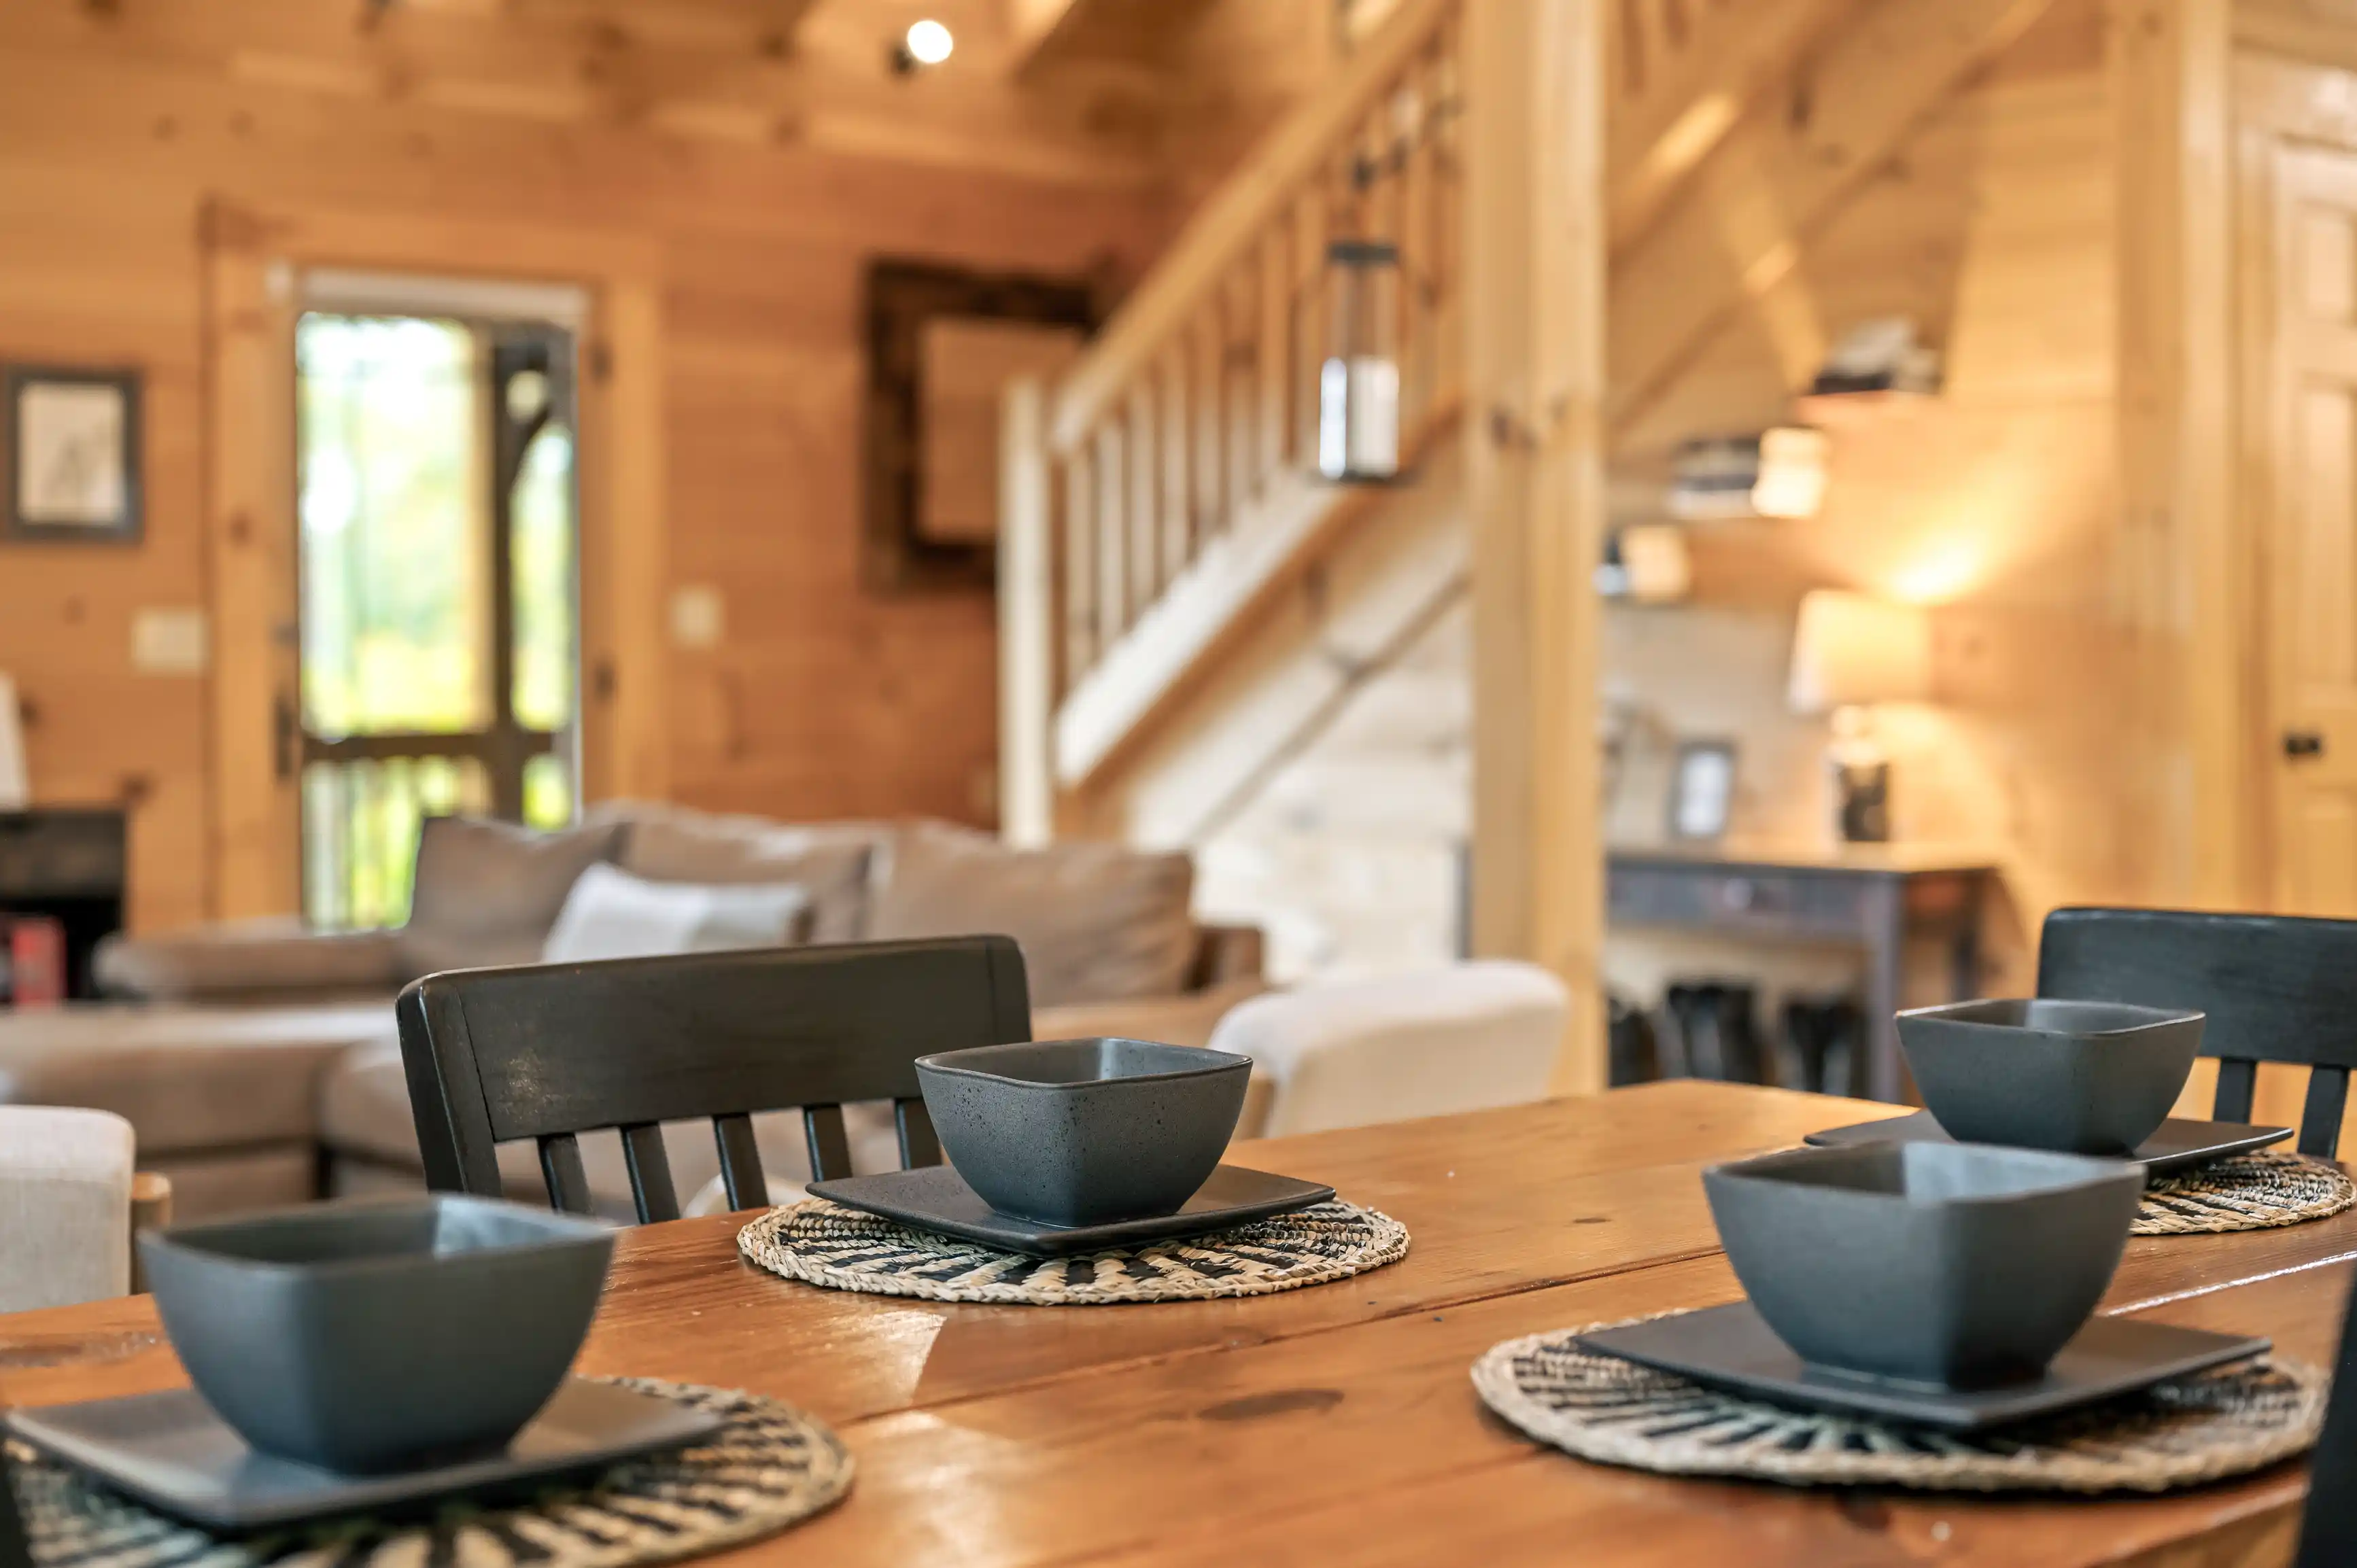 Cozy wooden cabin interior with focus on dining table set for two and blurred background featuring living area and stairs.